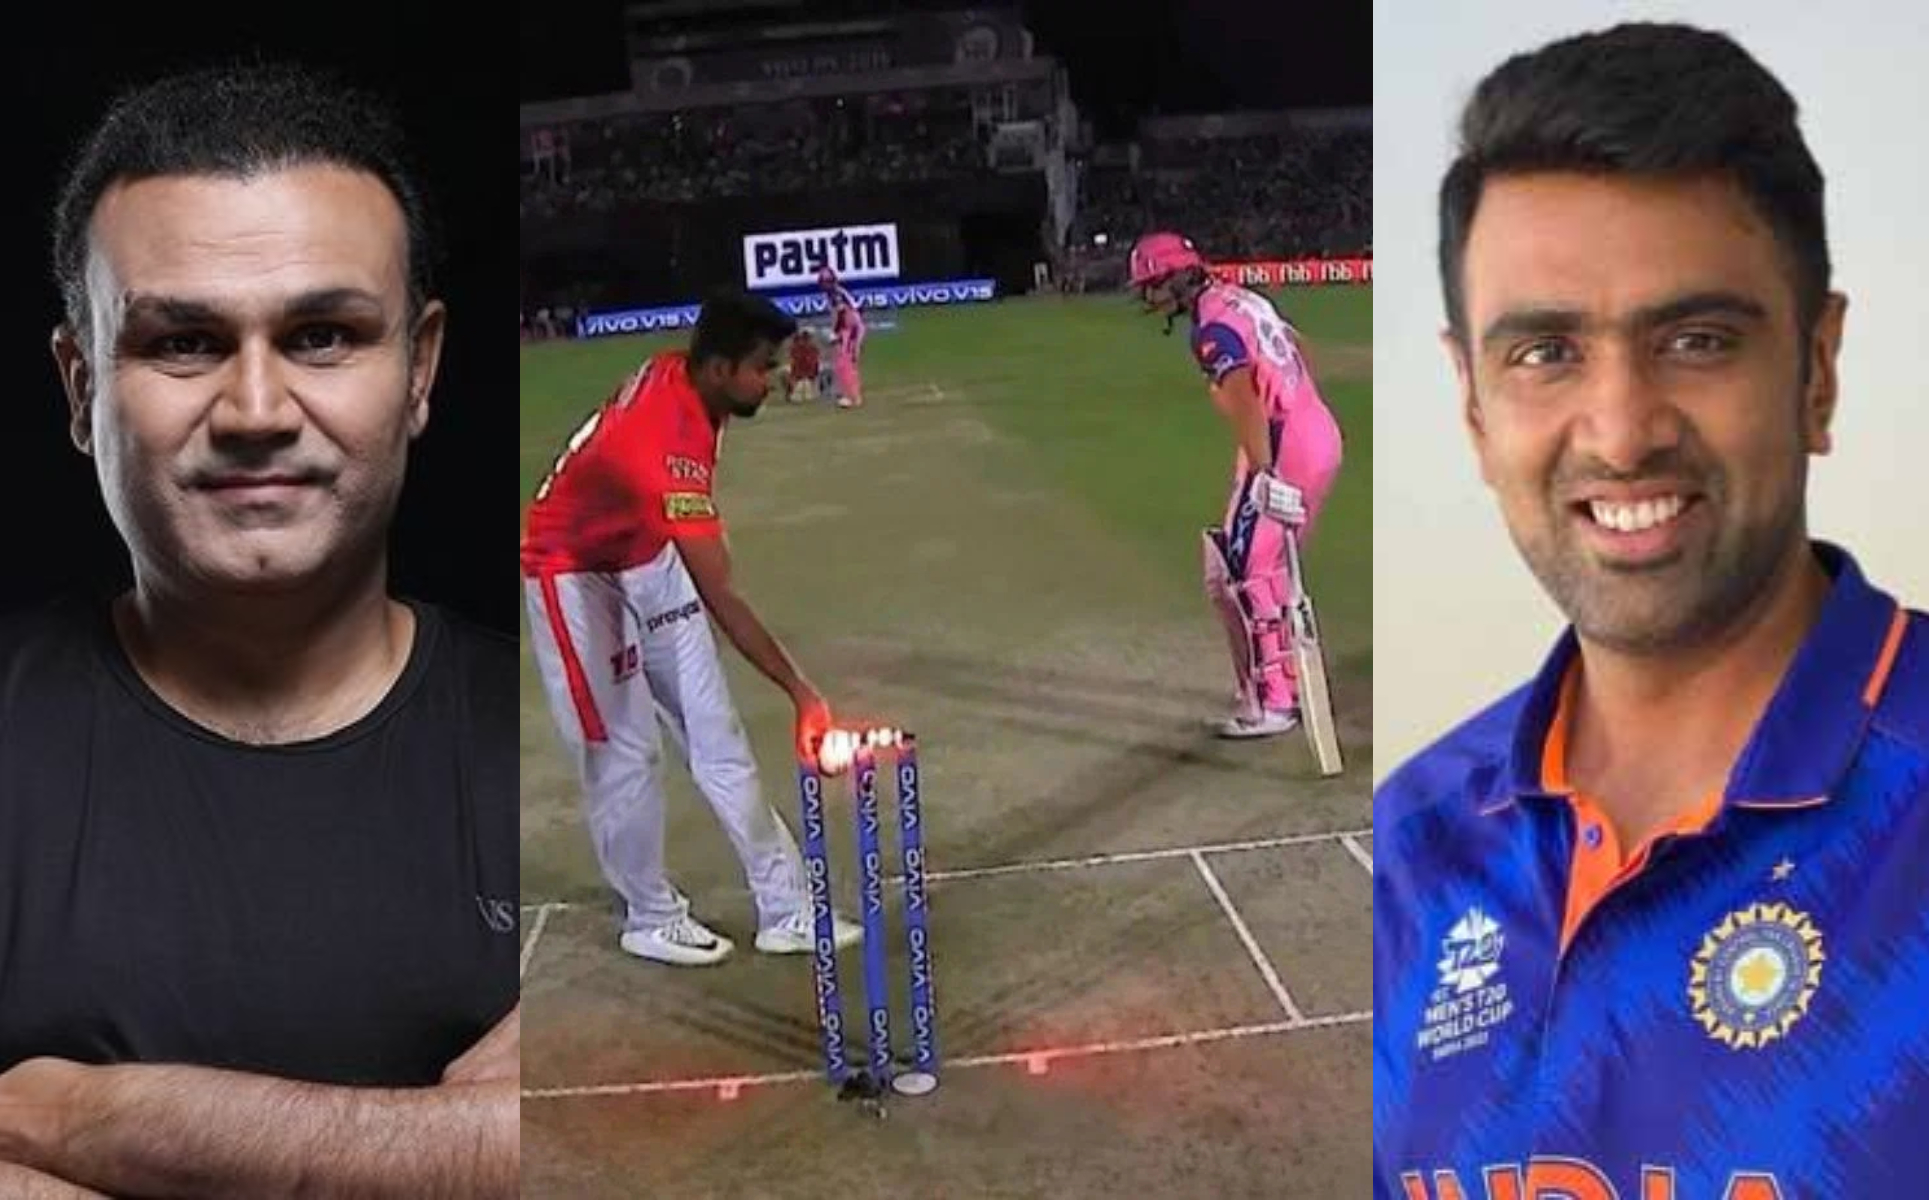 Ashwin had mankaded Buttler in IPL 2019 and Sehwag congratulated Ashwin for the rule change | Twitter